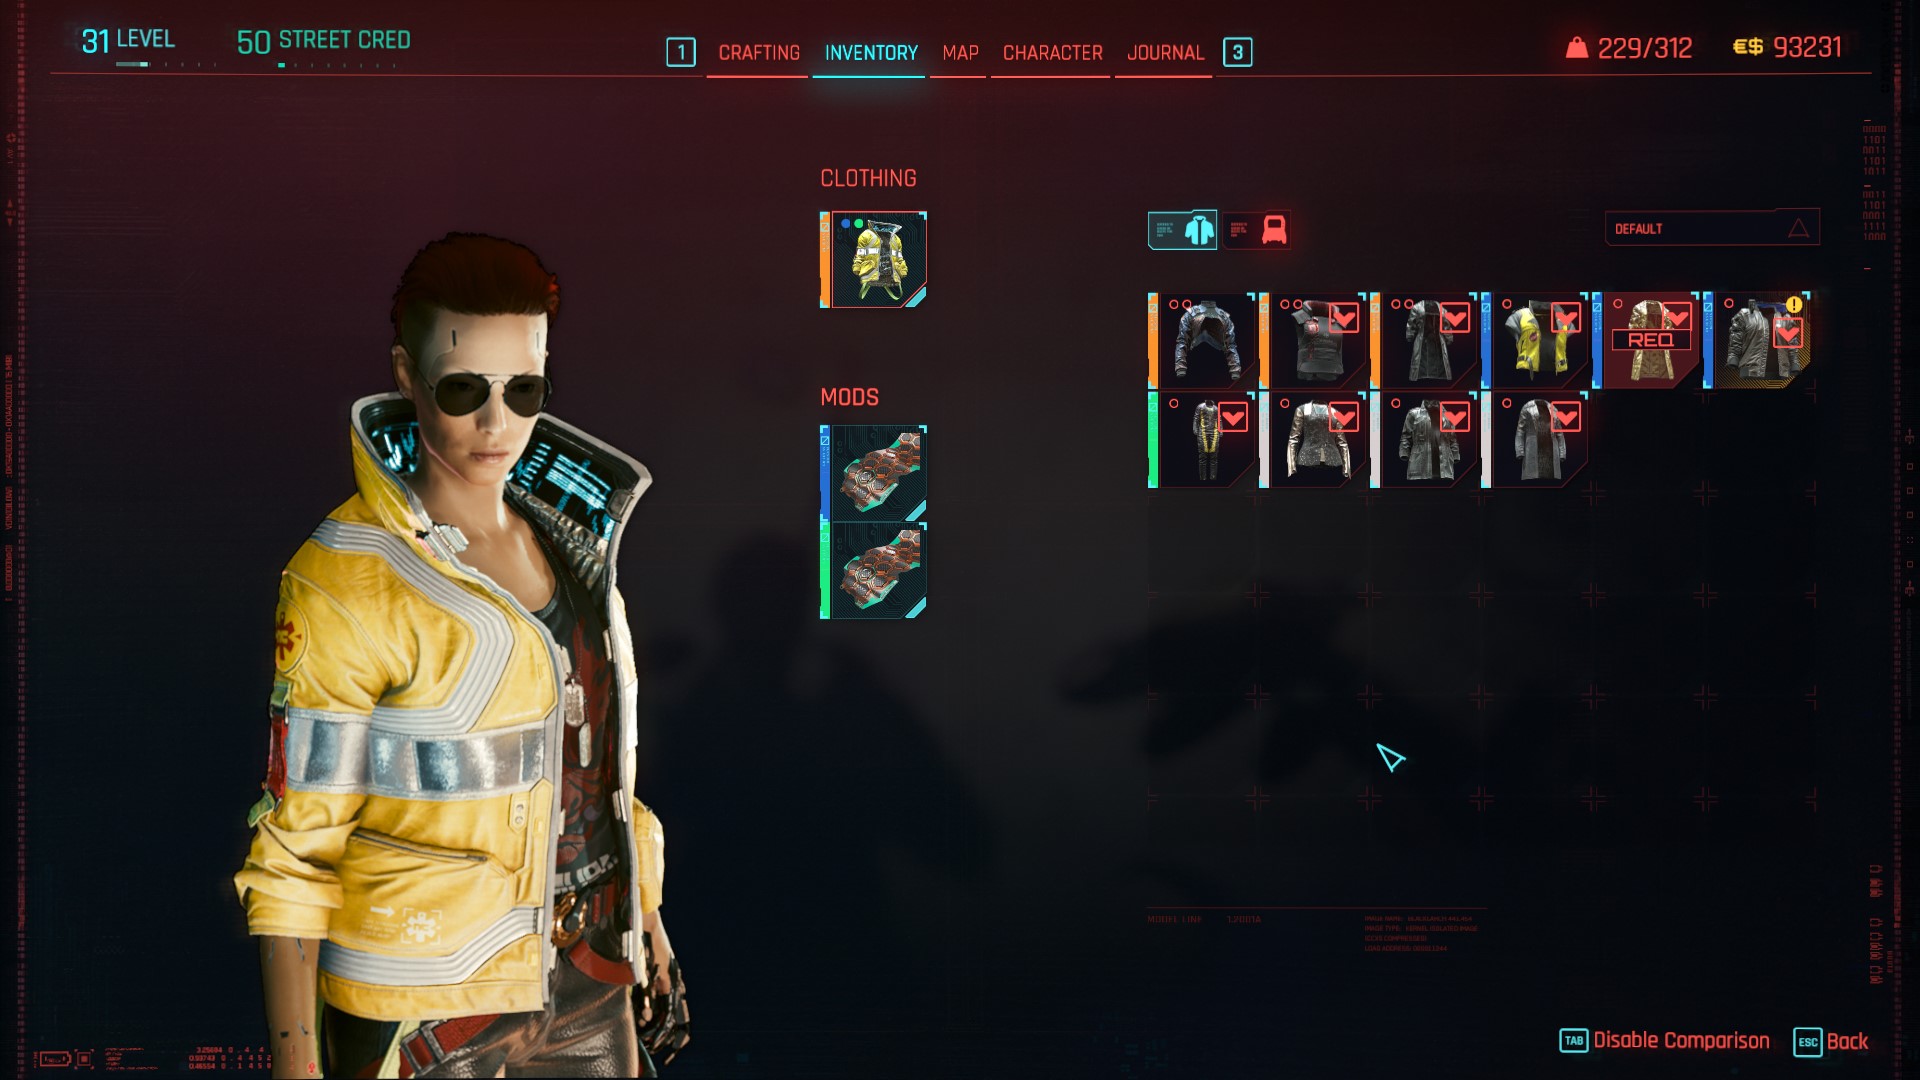 Cyberpunk 2077 - How to Get the Edgerunners Jacket - Quest Guide - Where to find David's Jacket - 6EE4237